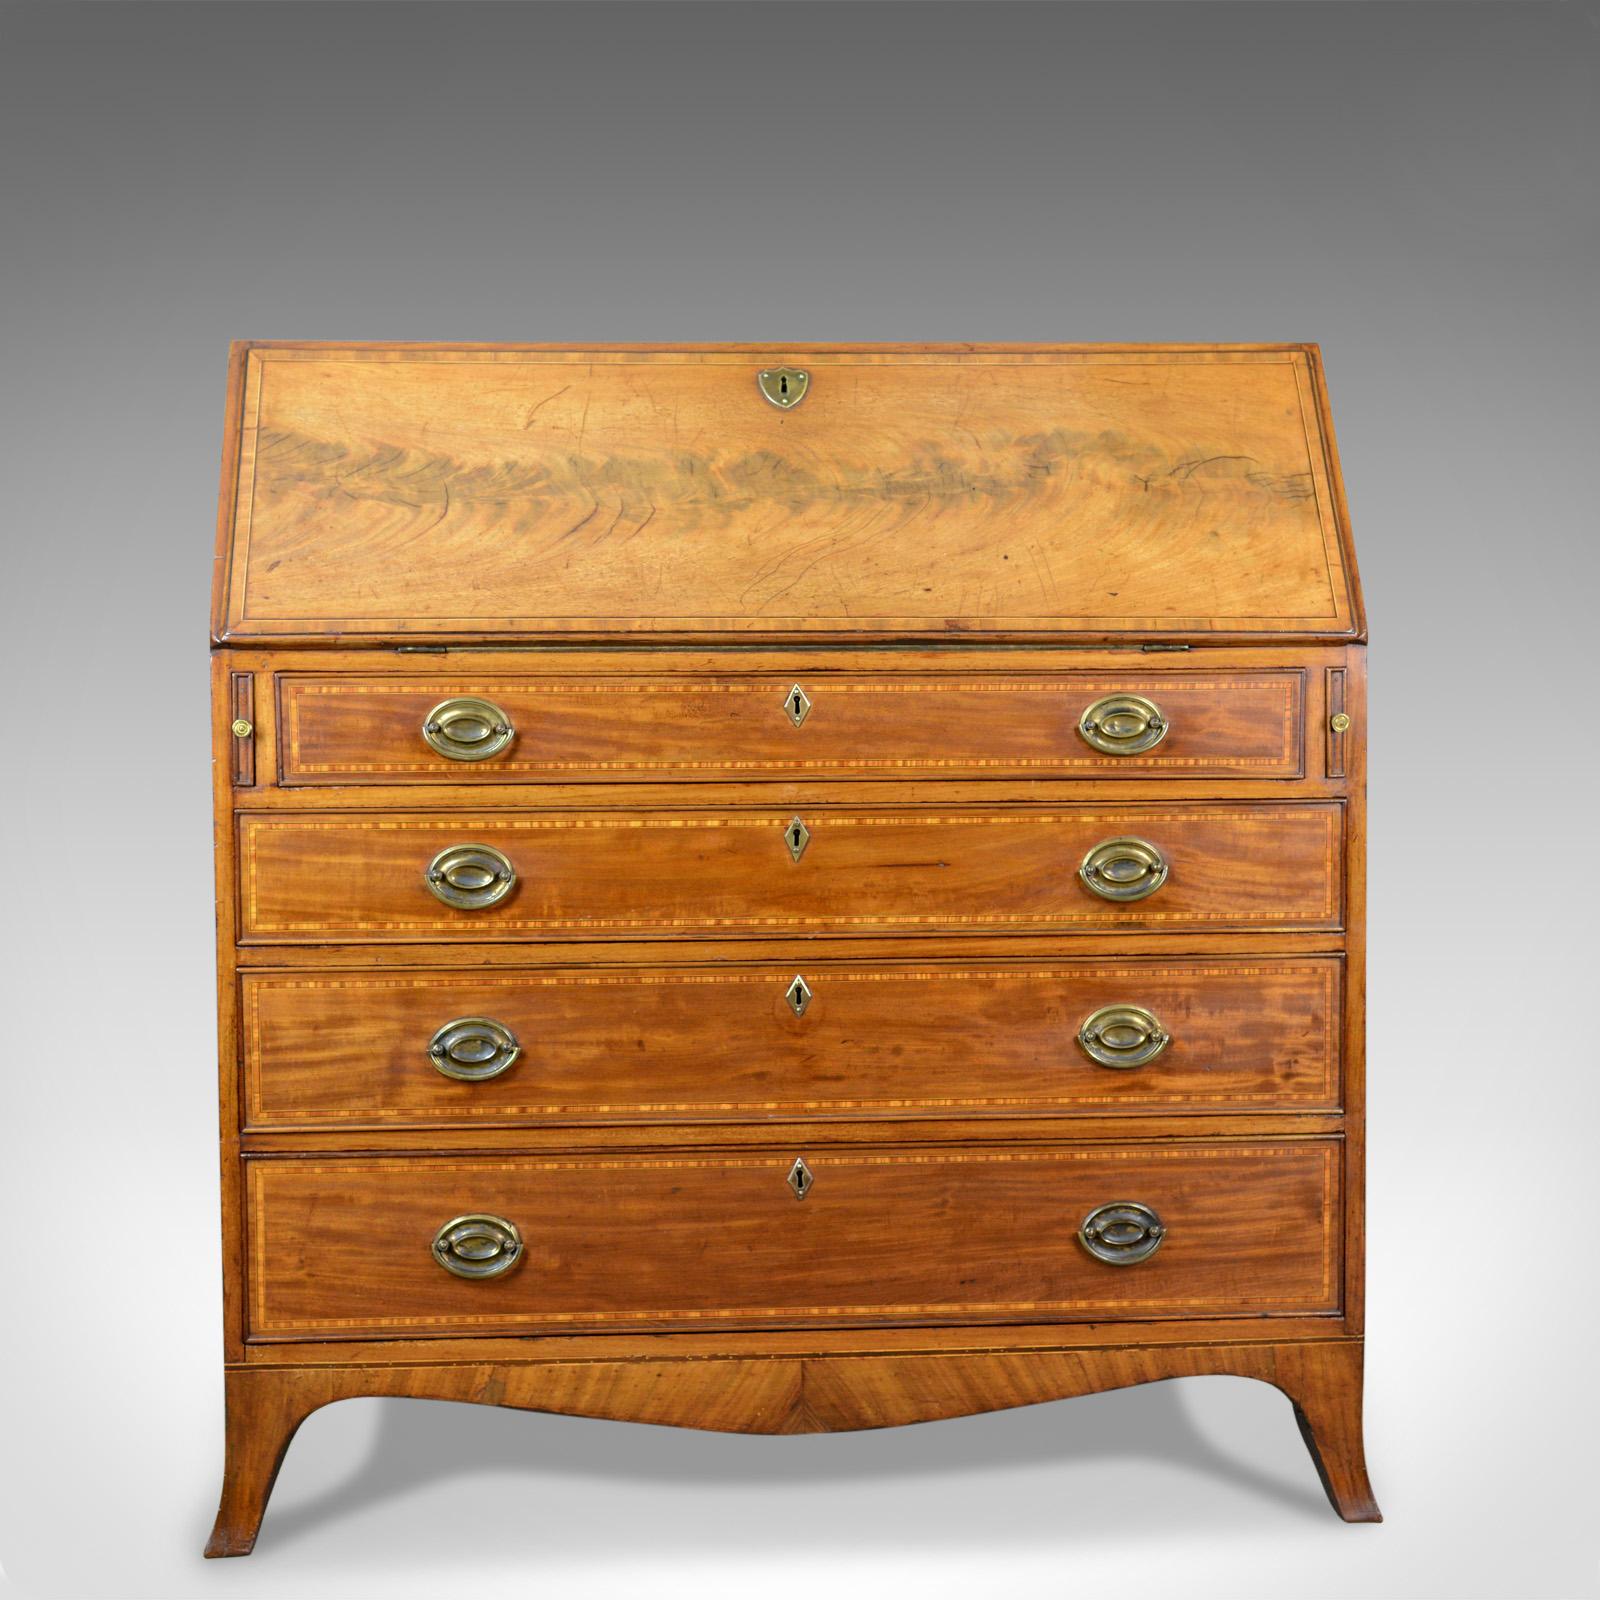 This is an antique bureau in light mahogany. An English, Georgian desk dating to the mid-18th century, circa 1770.

Quality craftsmanship in polished mahogany
Good color and grain interest throughout
Crossband decoration held in tramline ebony